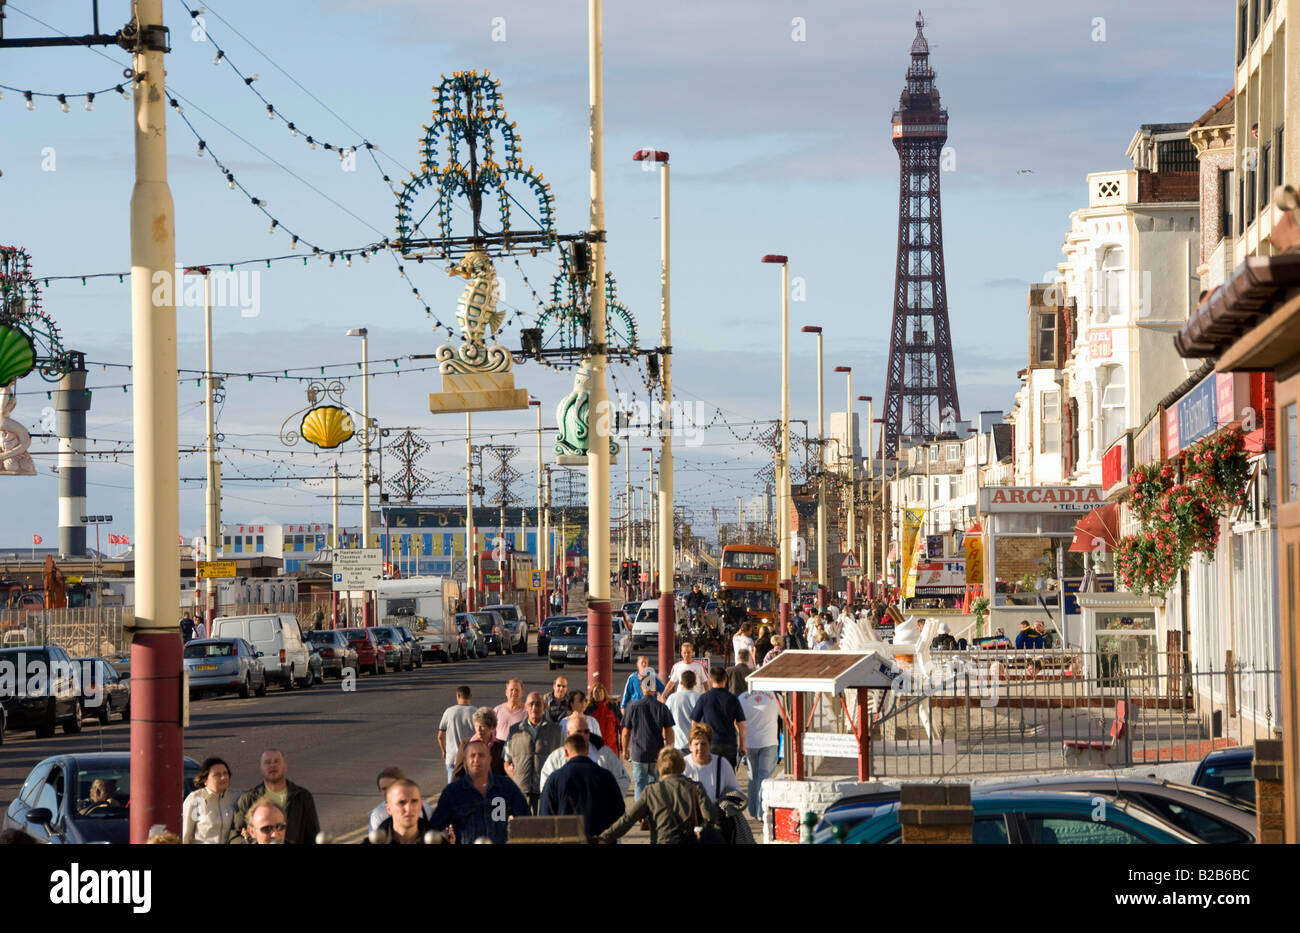 Hotels and holiday makers on Golden Mile of Blackpool promenade, Lancashire Stock Photo